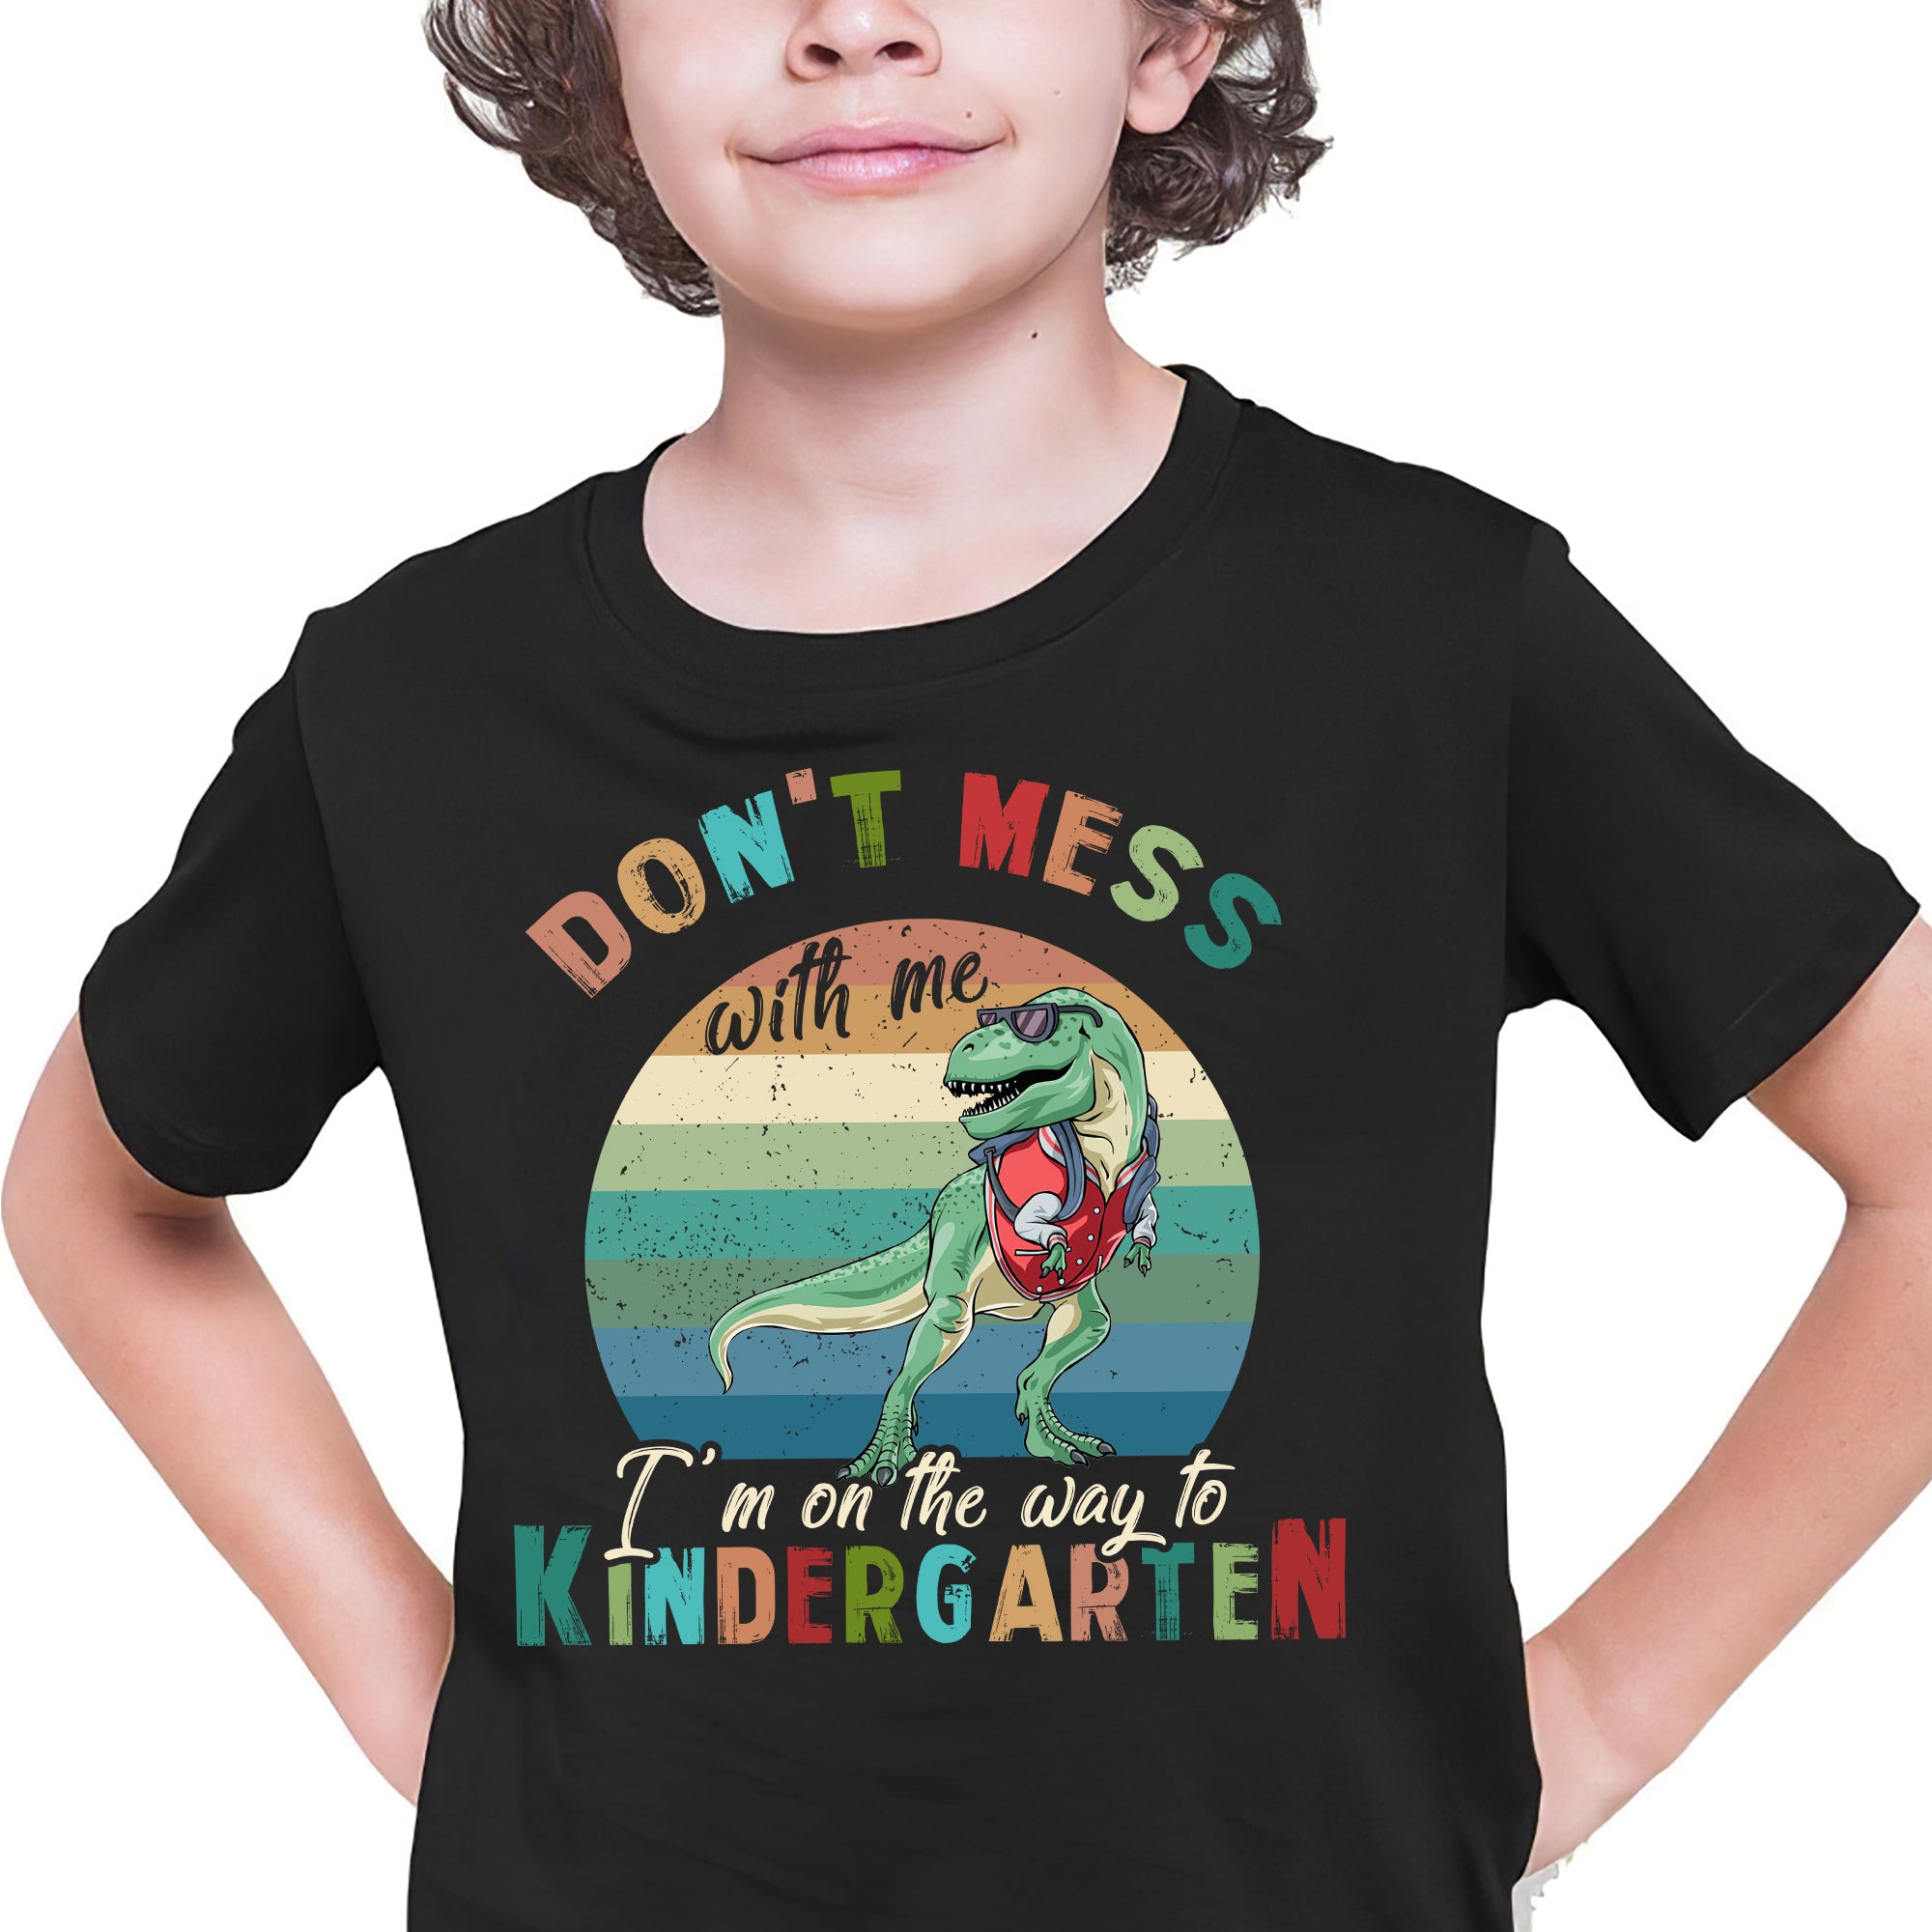 Dinosaur - Don't mess with me I'm on the way to kindergarten - Kid Apparel